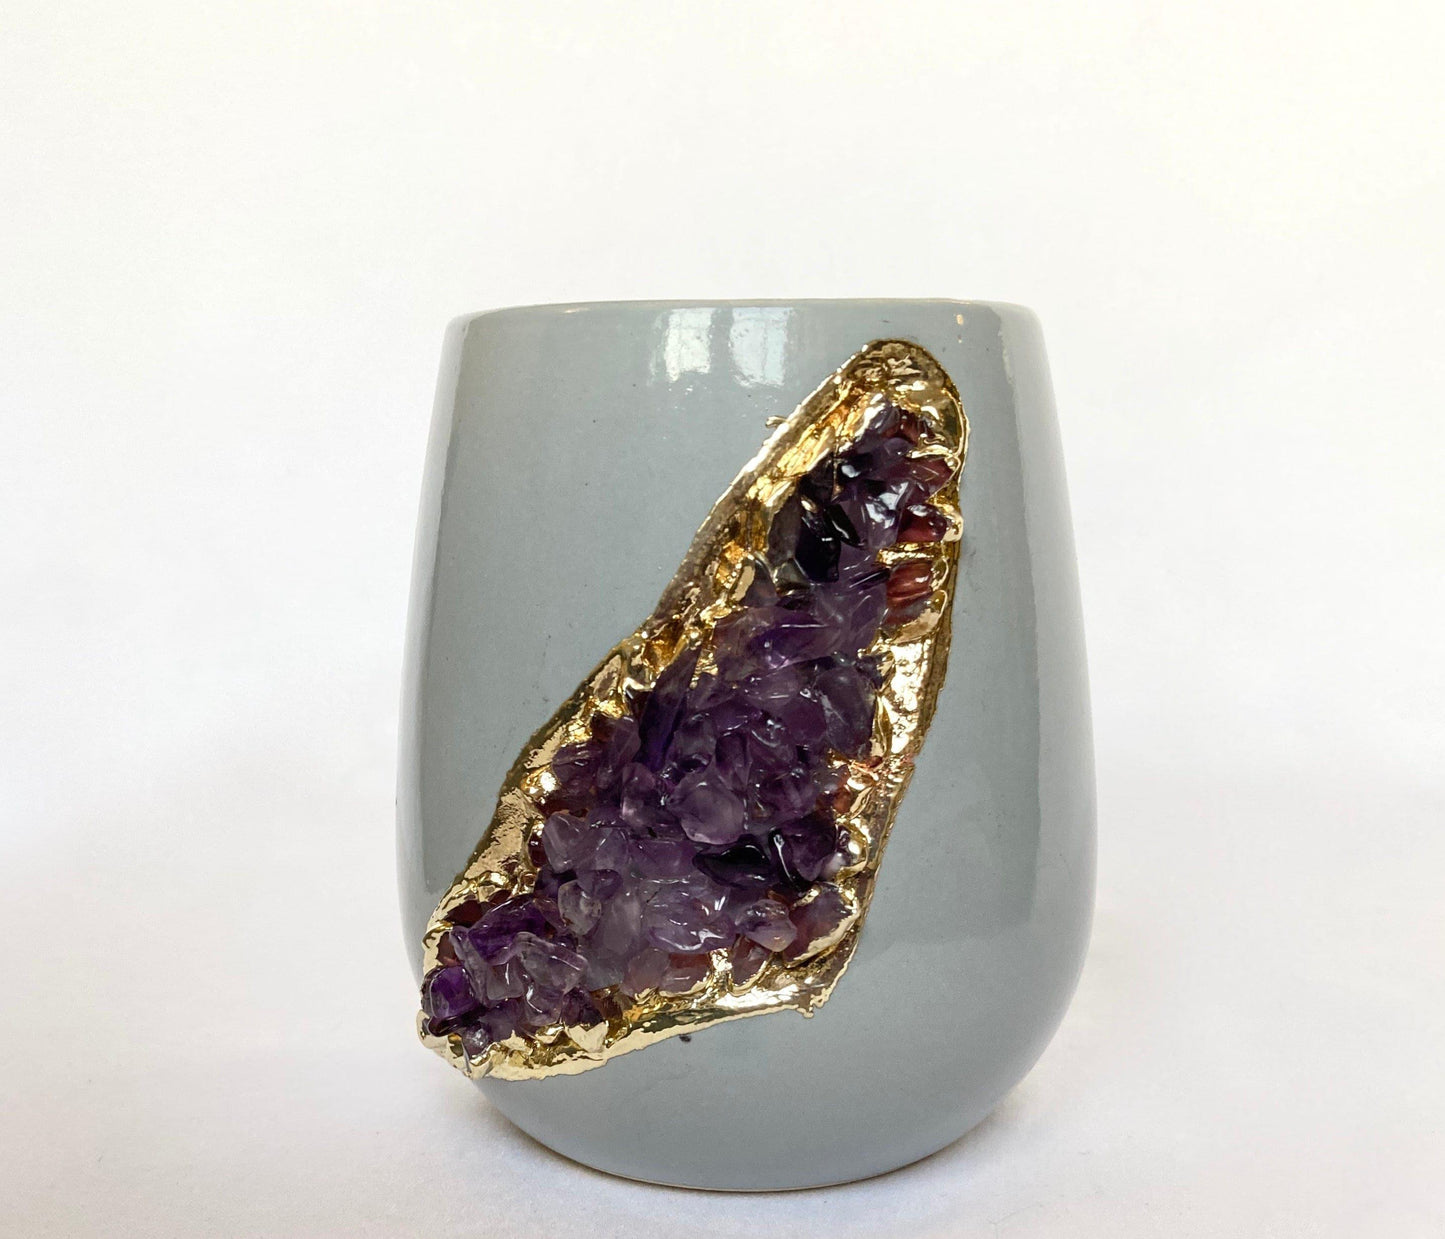 Purple Amethyst Crystal Grey and Gold Ceramic Vase - MAIA HOMES